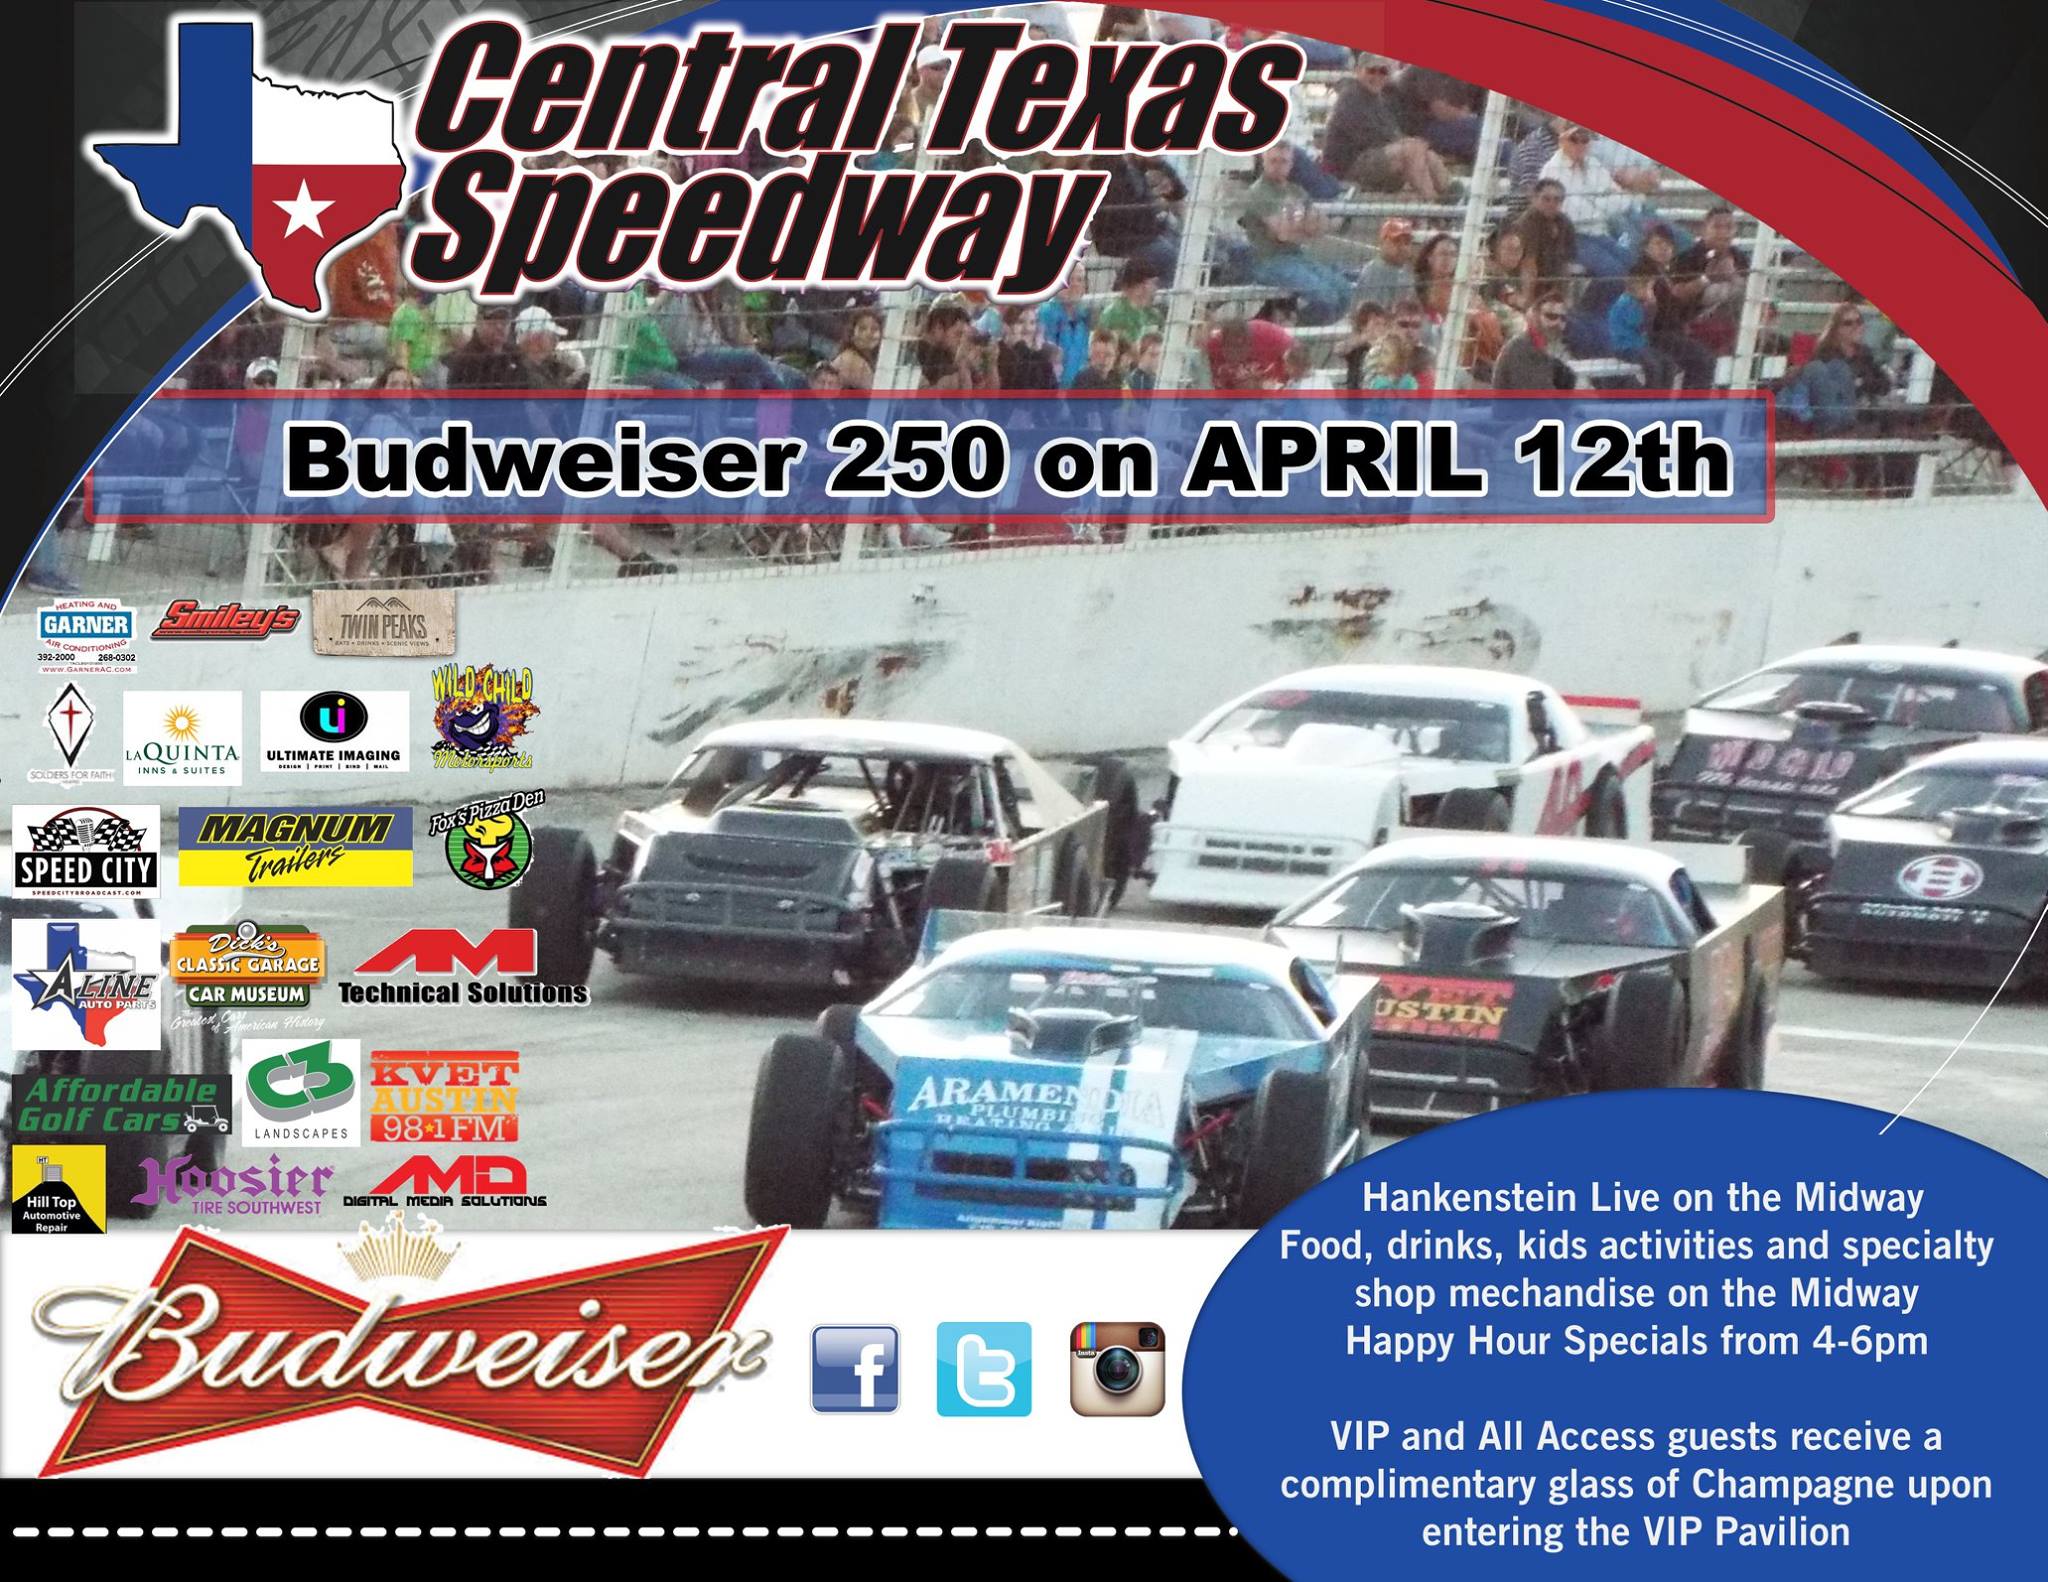 The Budweiser 250 at Central Texas Speedway